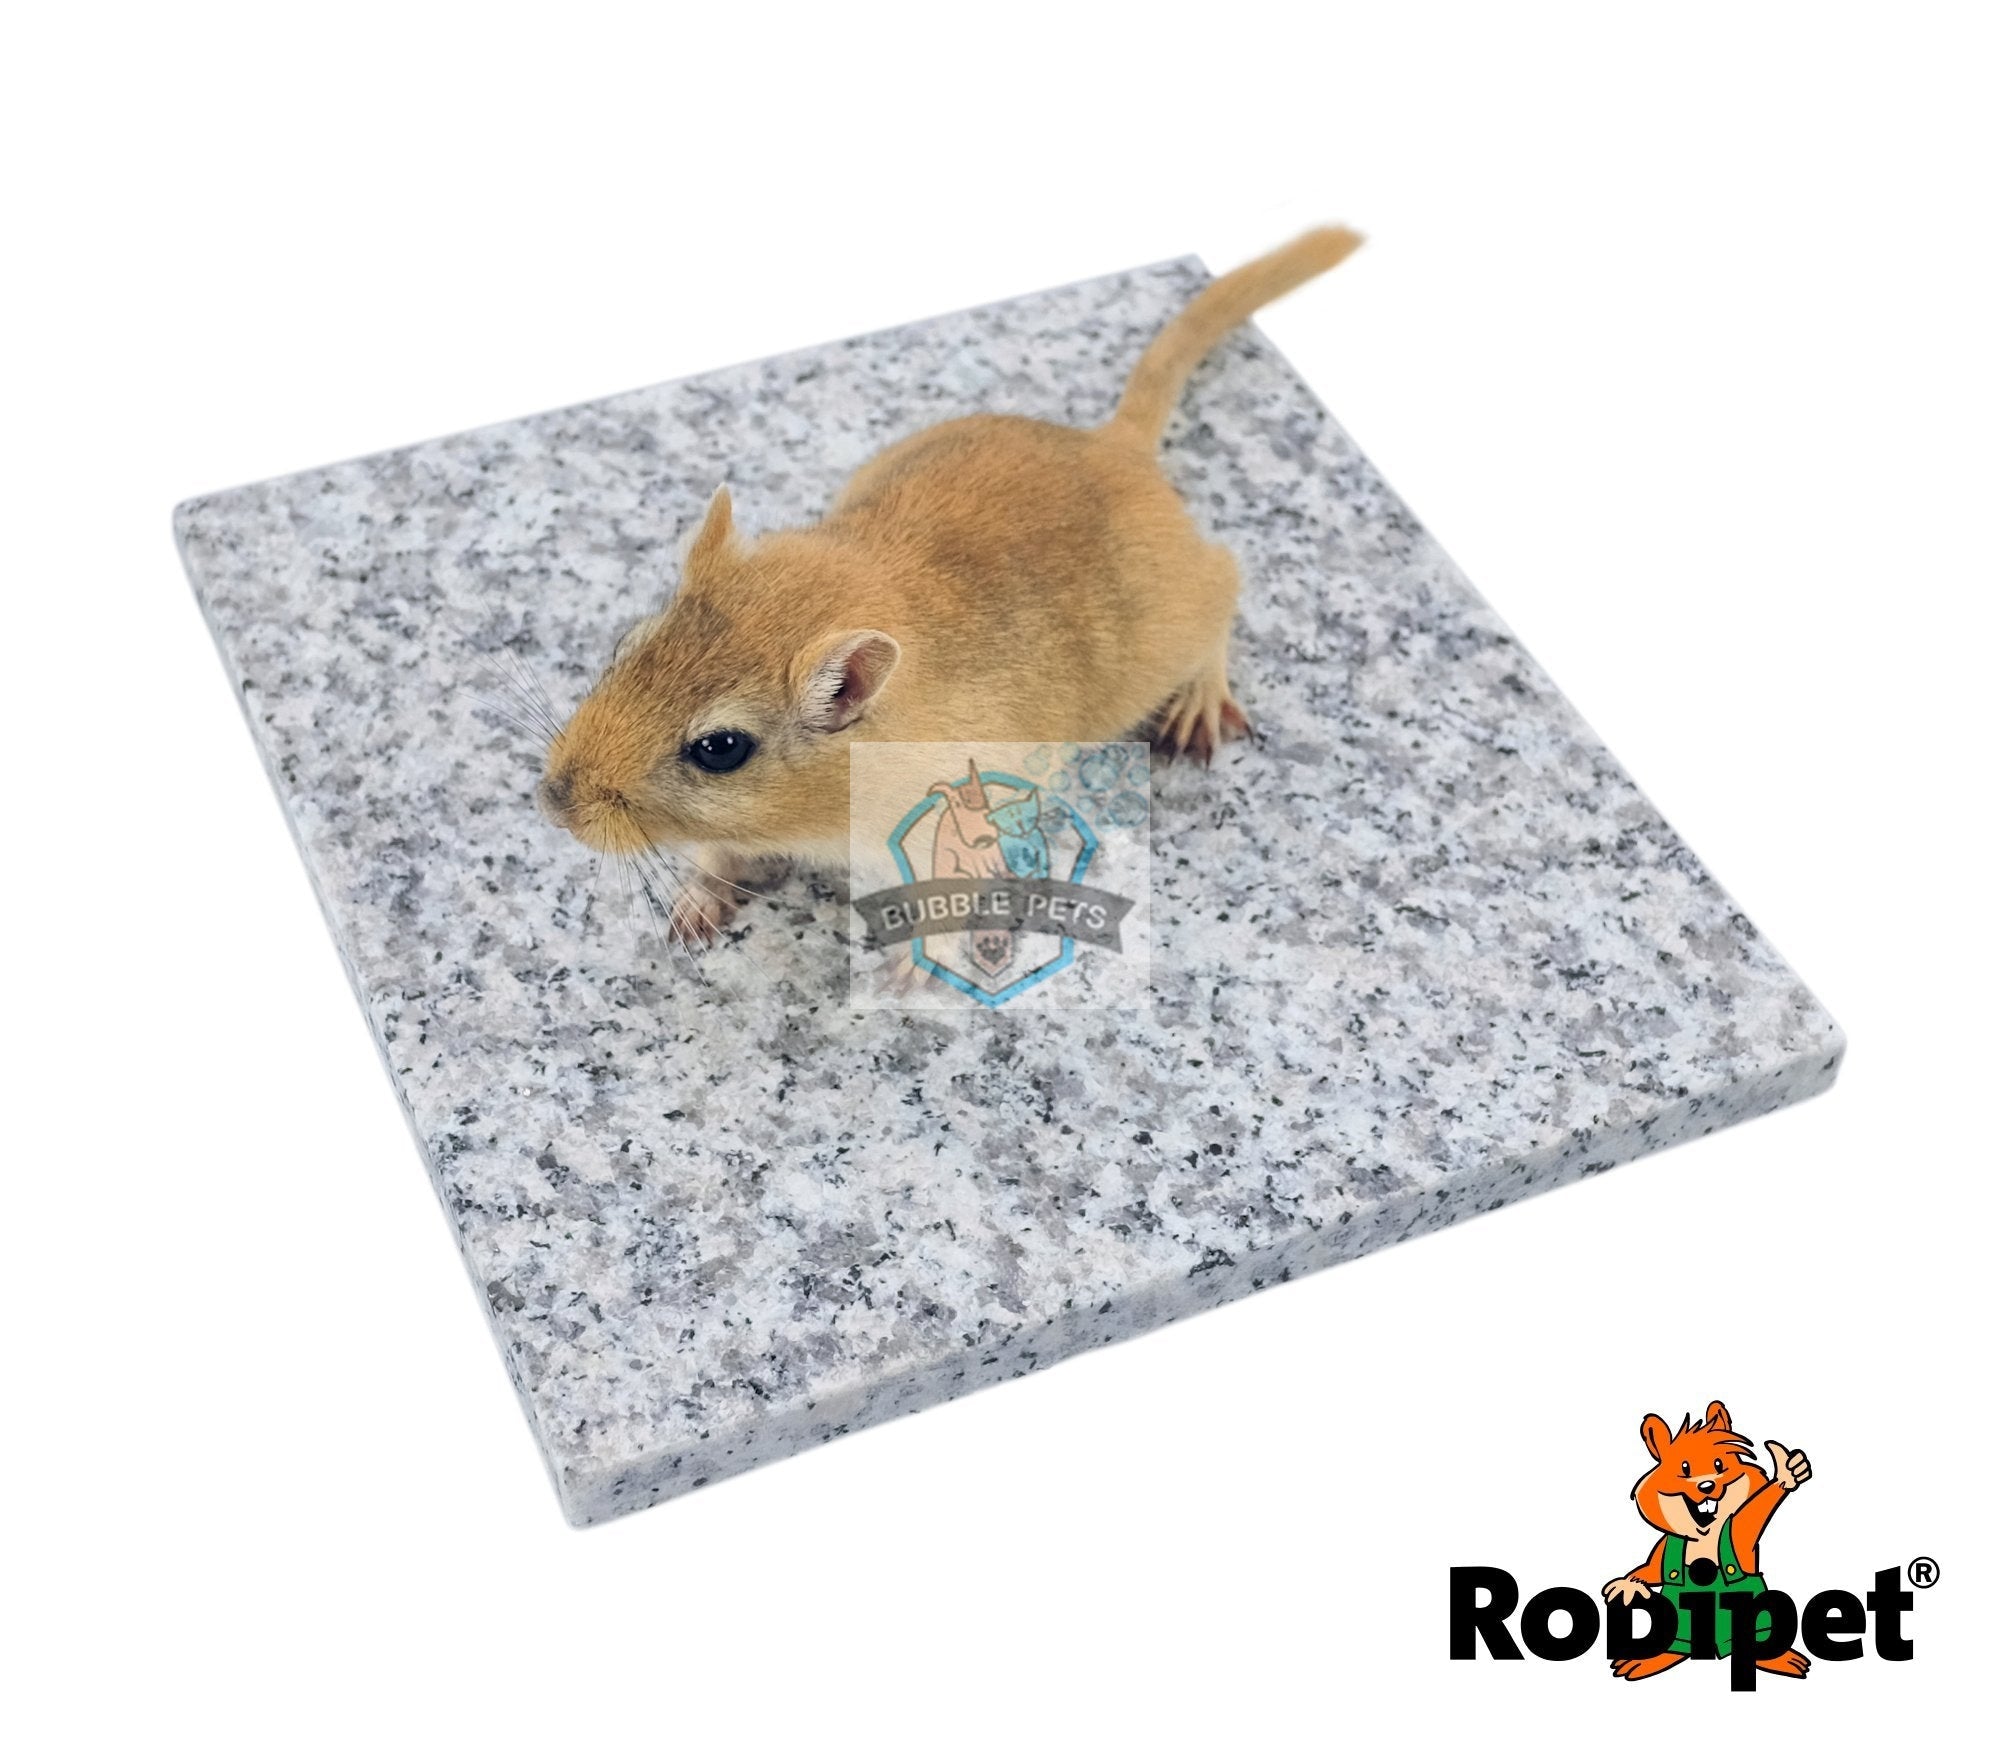 Rodipet Granit Cooling and Pedicure Stone